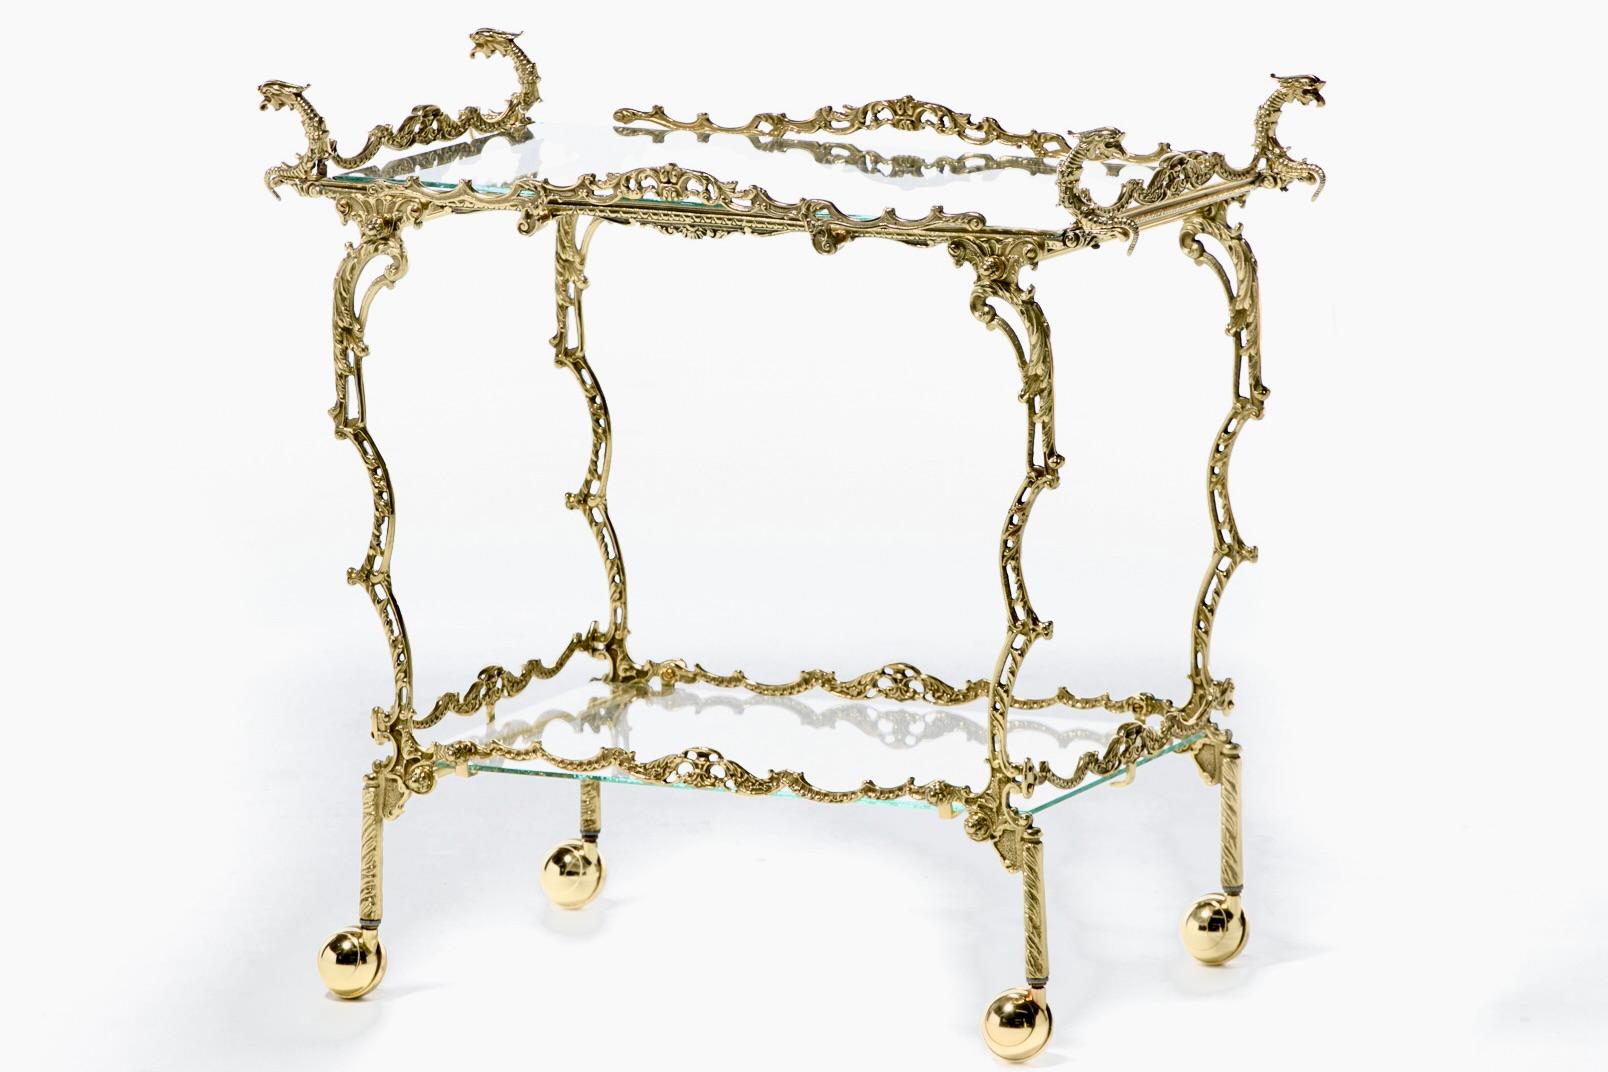 Hollywood Regency Ornate Chinoiserie Polished Brass Bar Cart c. 1955 For Sale 5